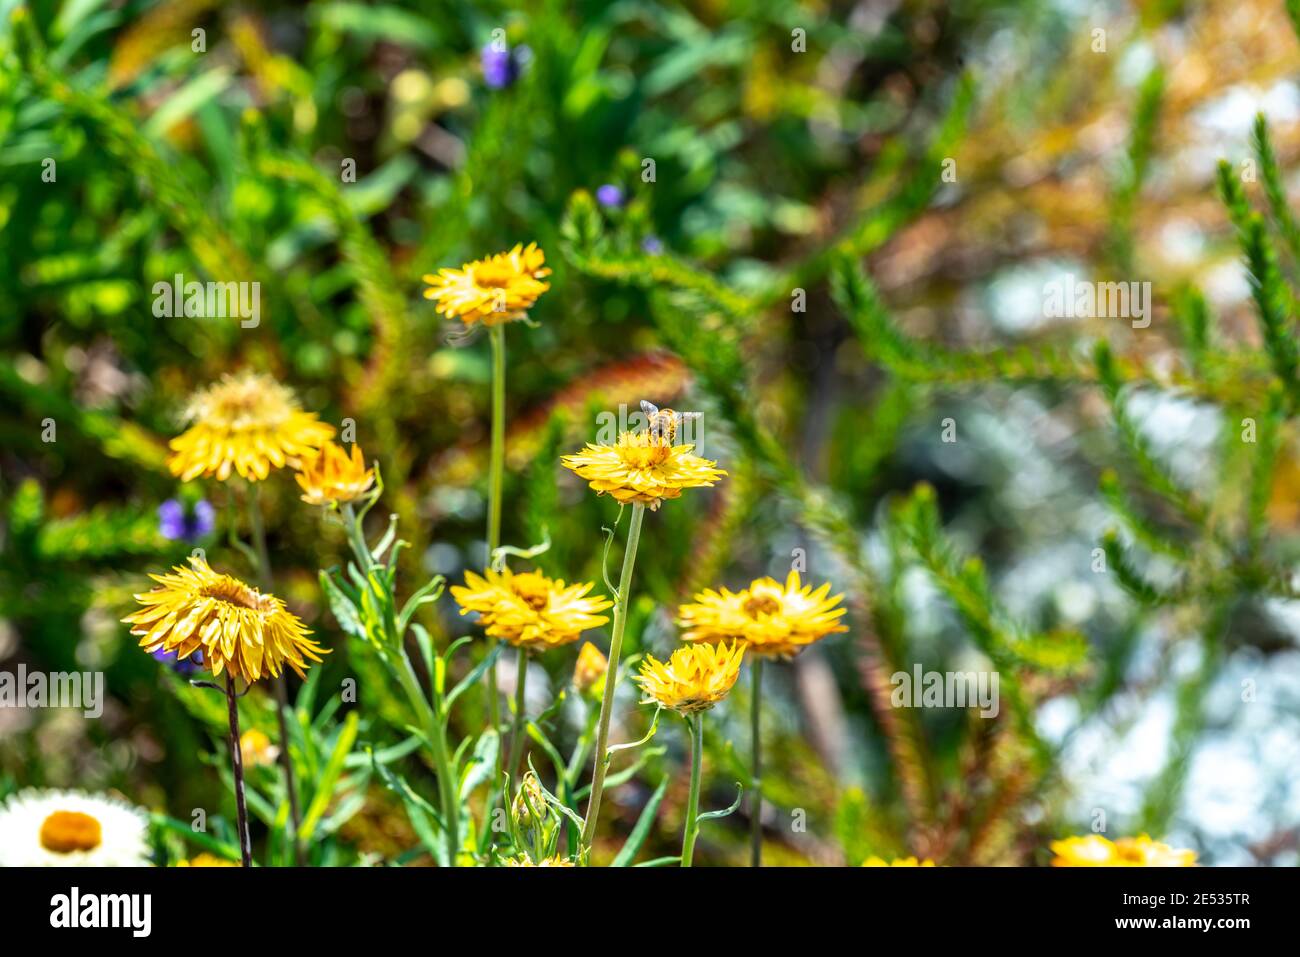 A bee gathers nectar on a bunch of Yellow Paper Daisies,  in an Australian garden setting Stock Photo